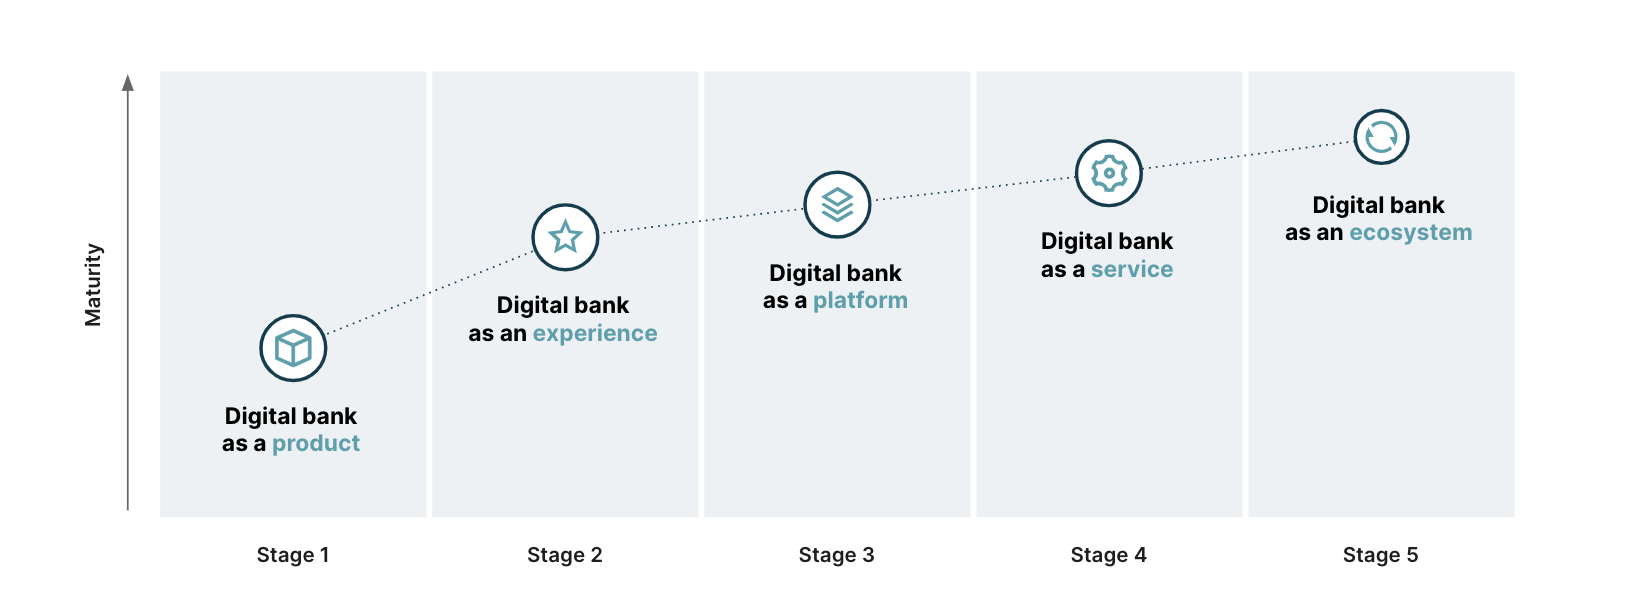 the digital bank has evolved from a product to an experience to a platform to a service to finally an ecosystem